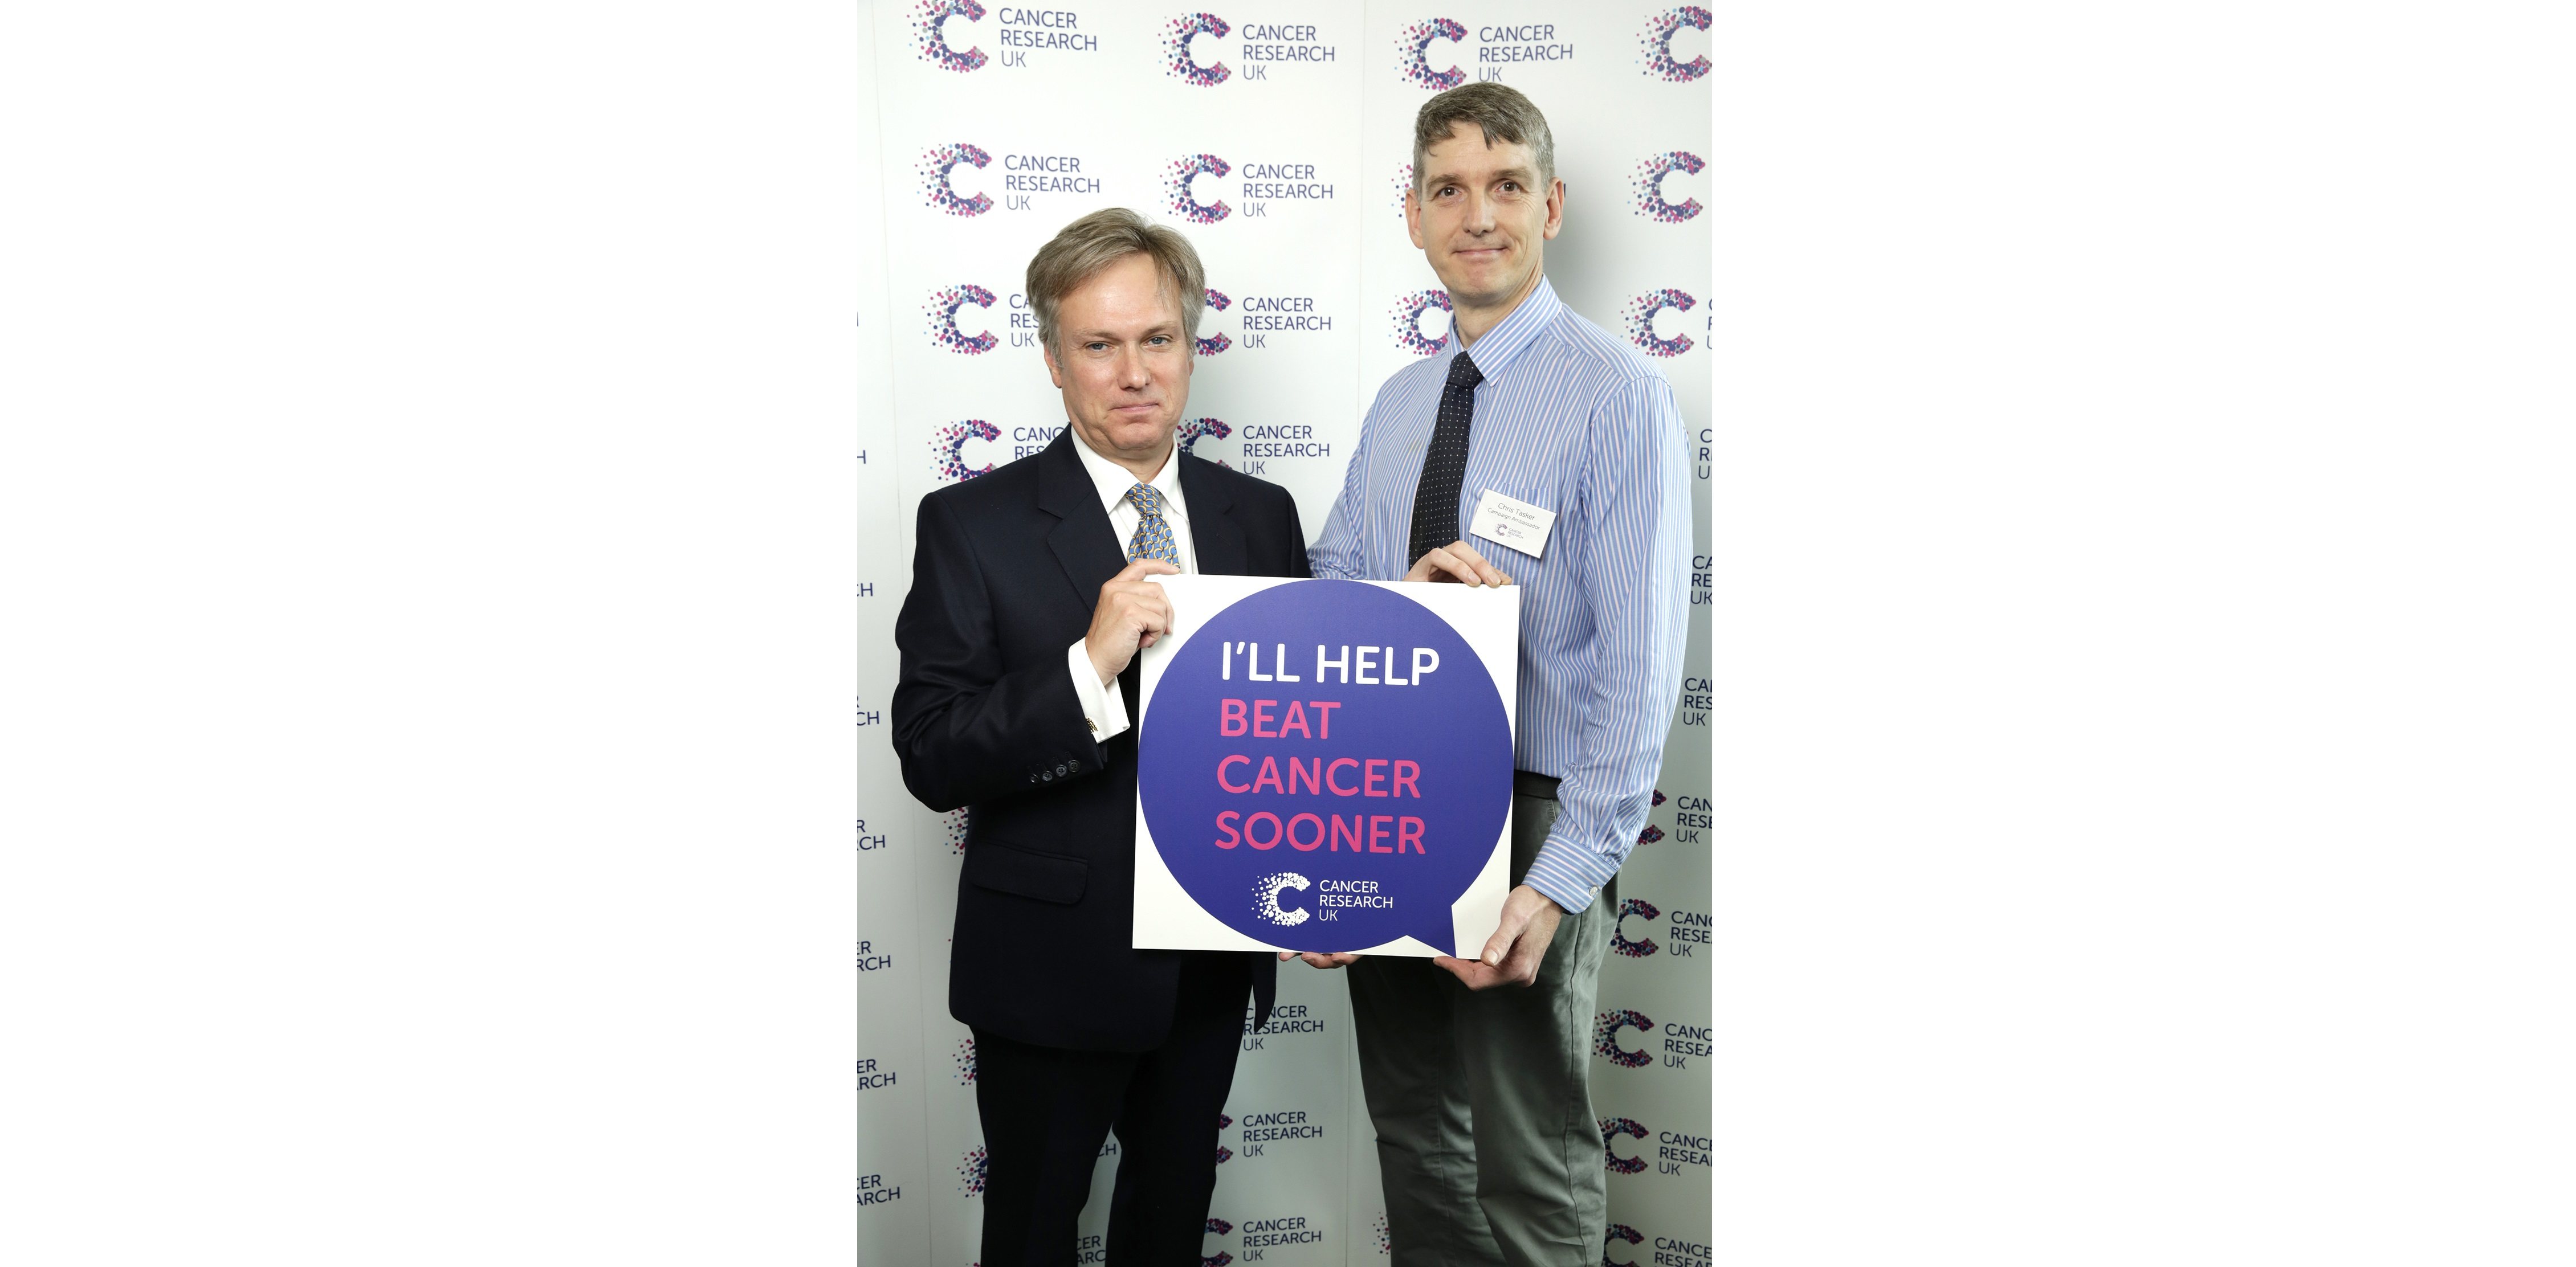 Henry Smith Mp Pledges To Help Beat Cancer Sooner Henry Smith